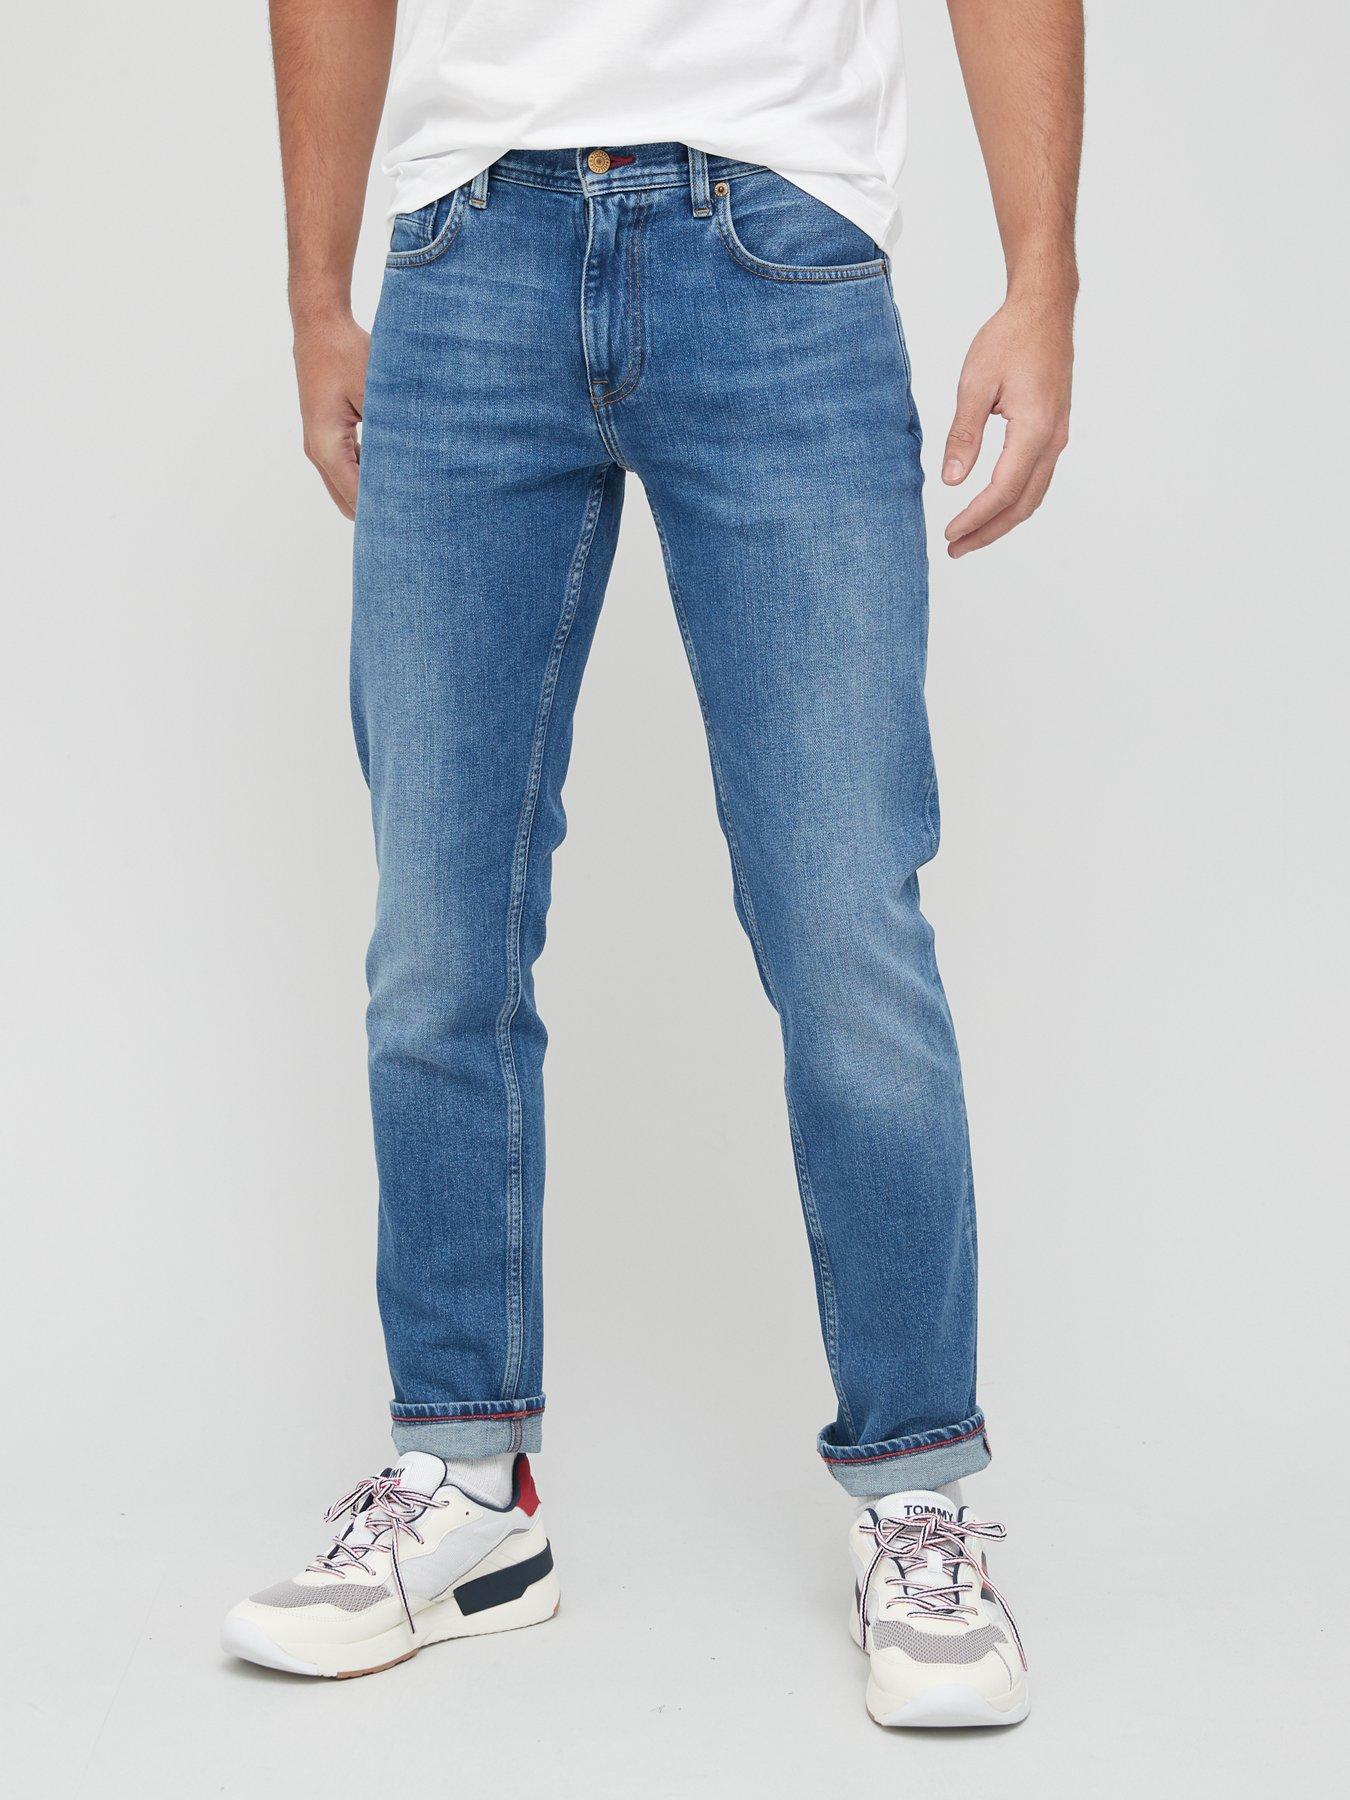 Save 5% Attachment Jeans In Denim in Blue for Men Mens Clothing Jeans Straight-leg jeans 